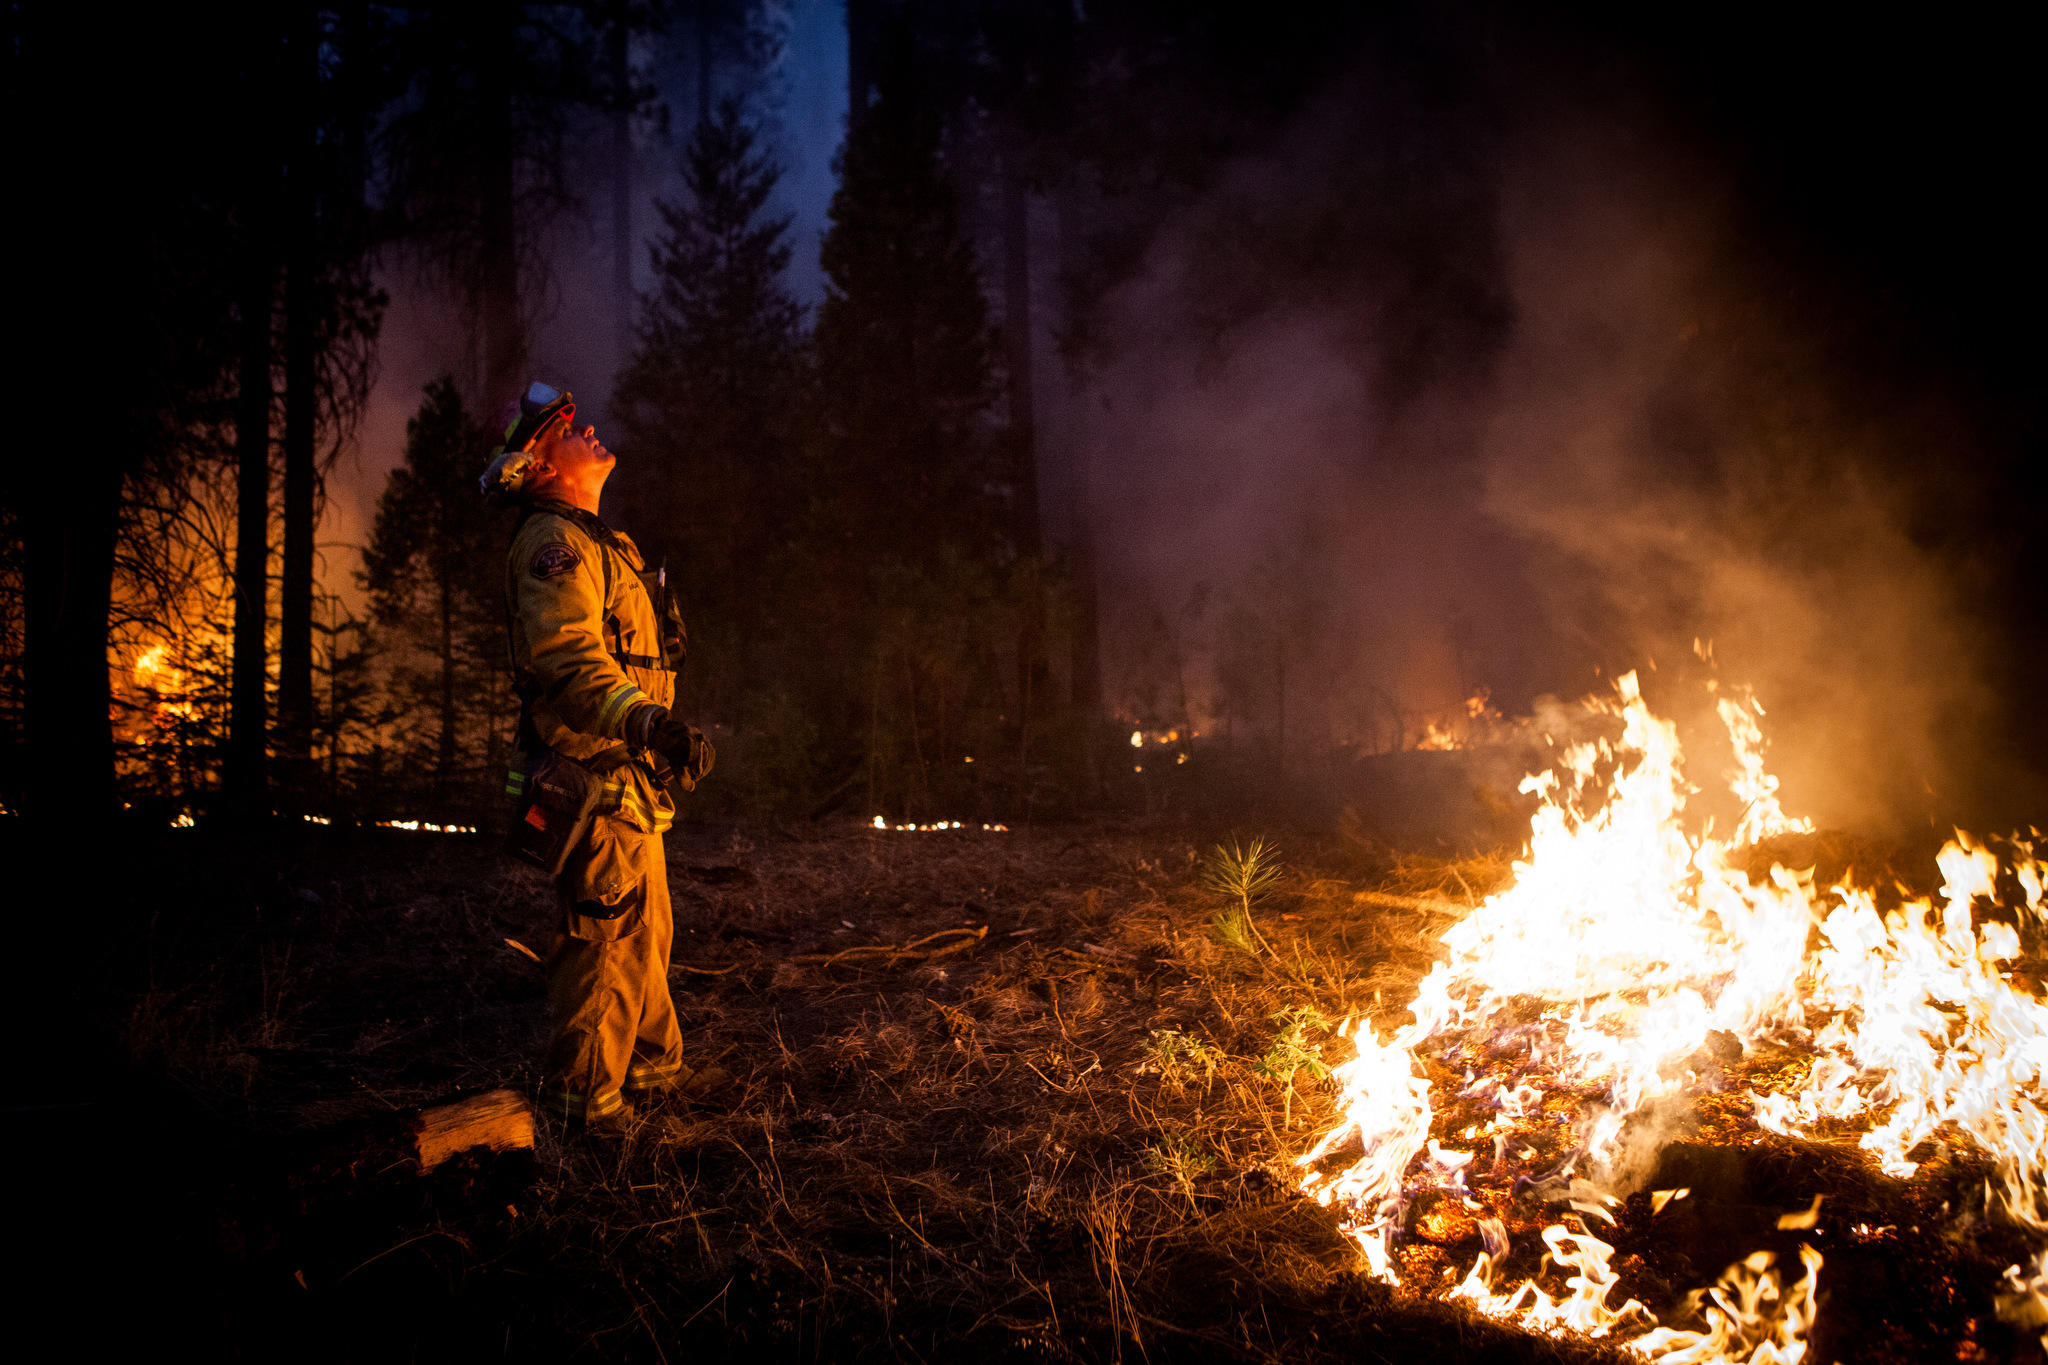  Sacramento Metropolitan firefighter John Graf monitors the Rim Fire line near Camp Mather, California, August 26, 2013. The Rim Fire burned 257,314 acres and is the third largest wildfire in California history. 